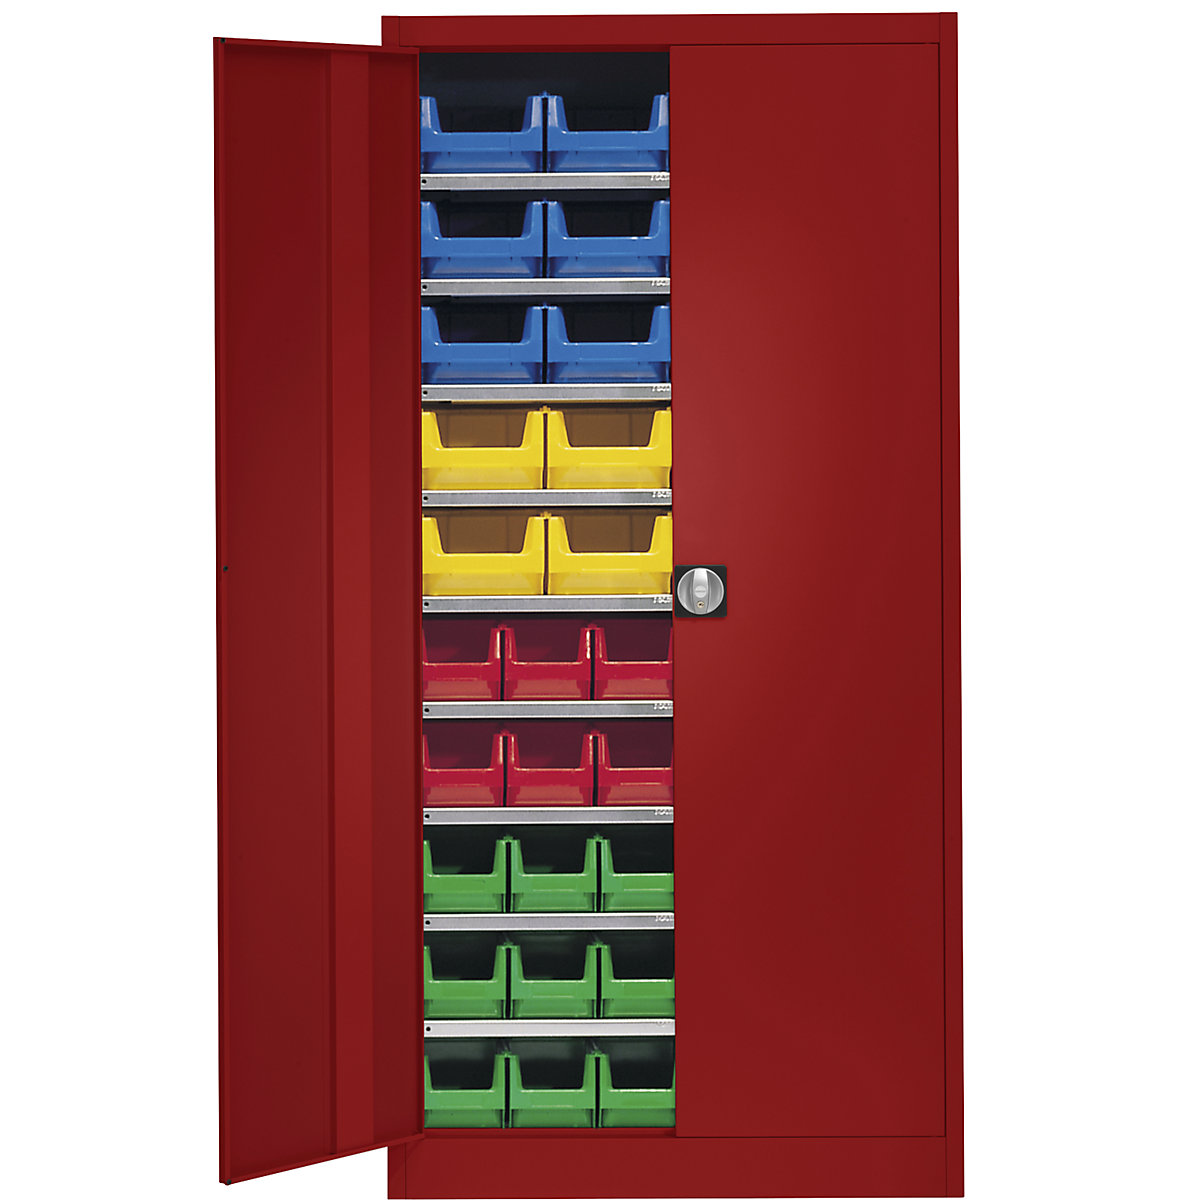 Storage cupboard, single colour – mauser, with 50 open fronted storage bins, 9 shelves, red-4